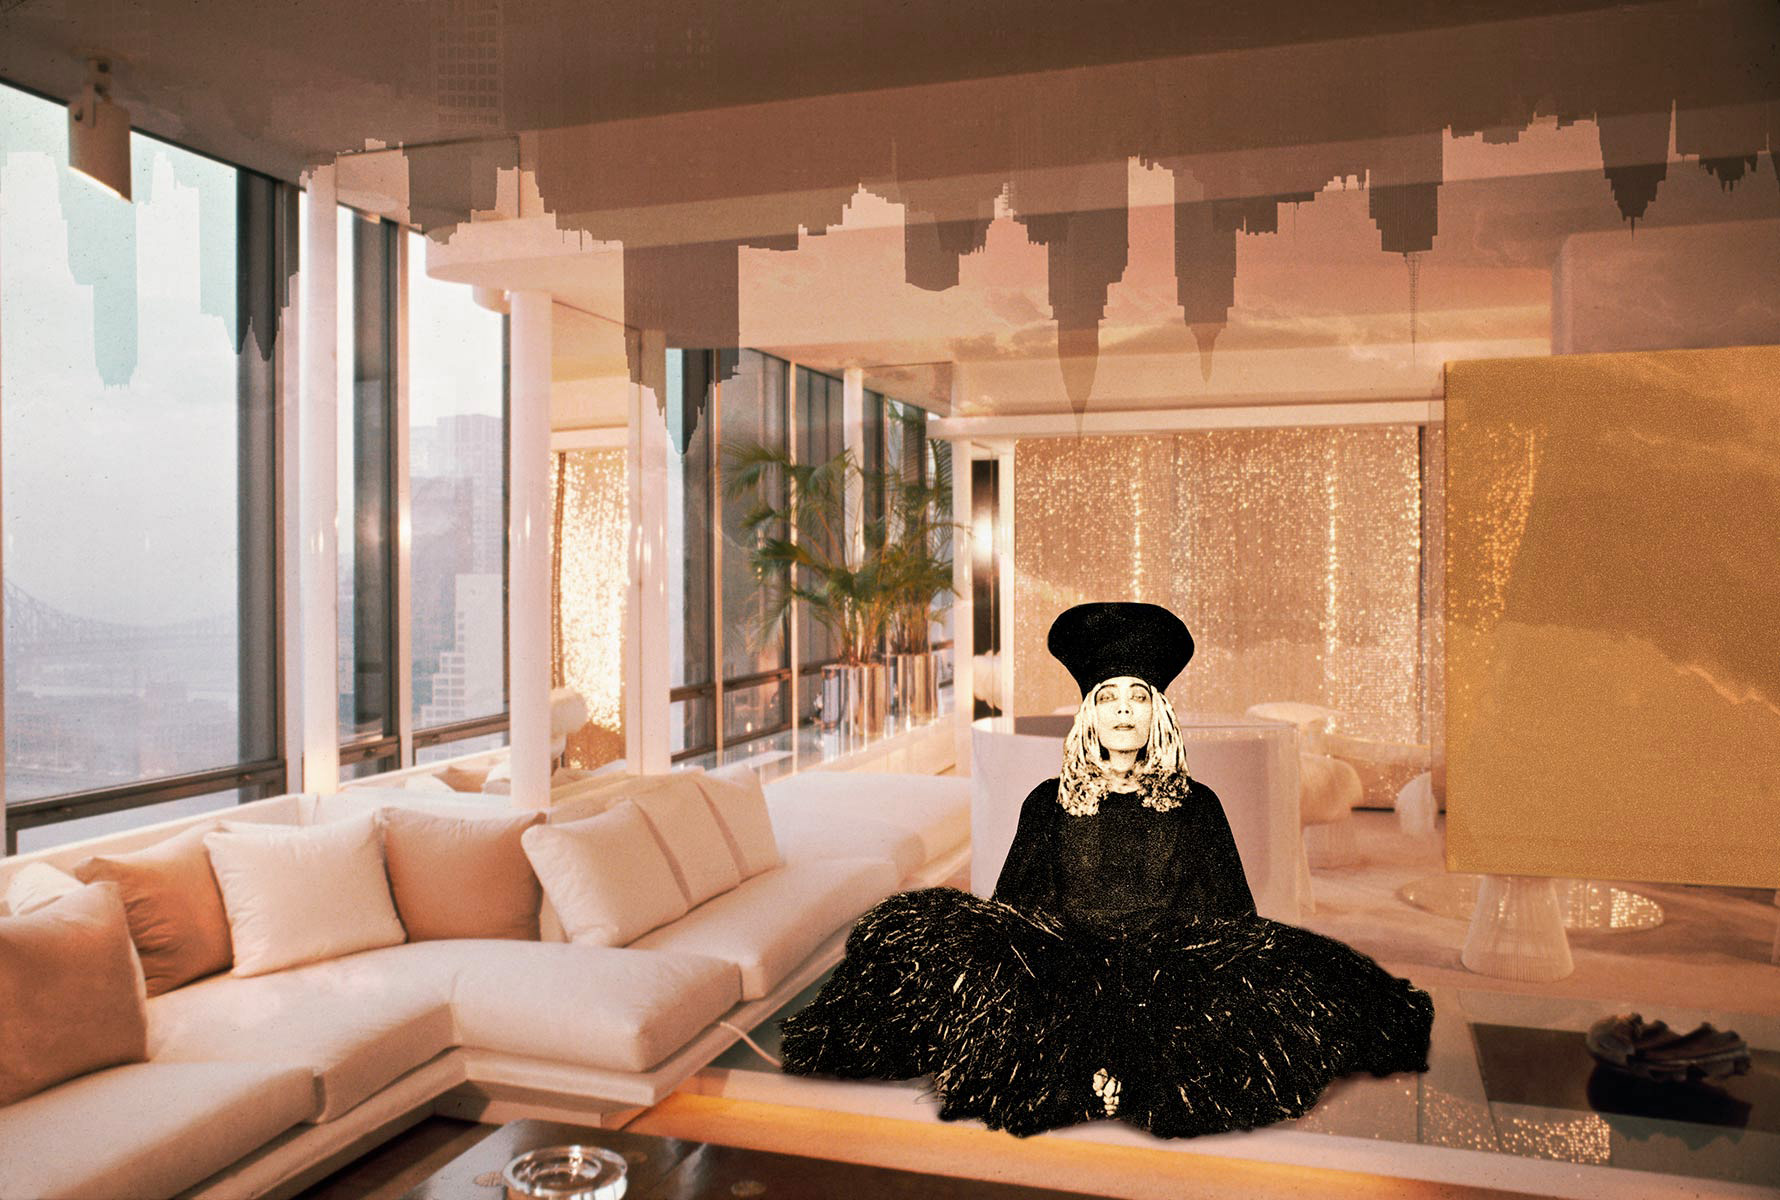 Mary Wigman commands your attention sitting in a warm toned modern living room of the Kaiser residence. The ceiling has an Abelardo Morell inspired theme projection. Room designed in 1967 by Paul Rudolph architect based in New York City. (2015)